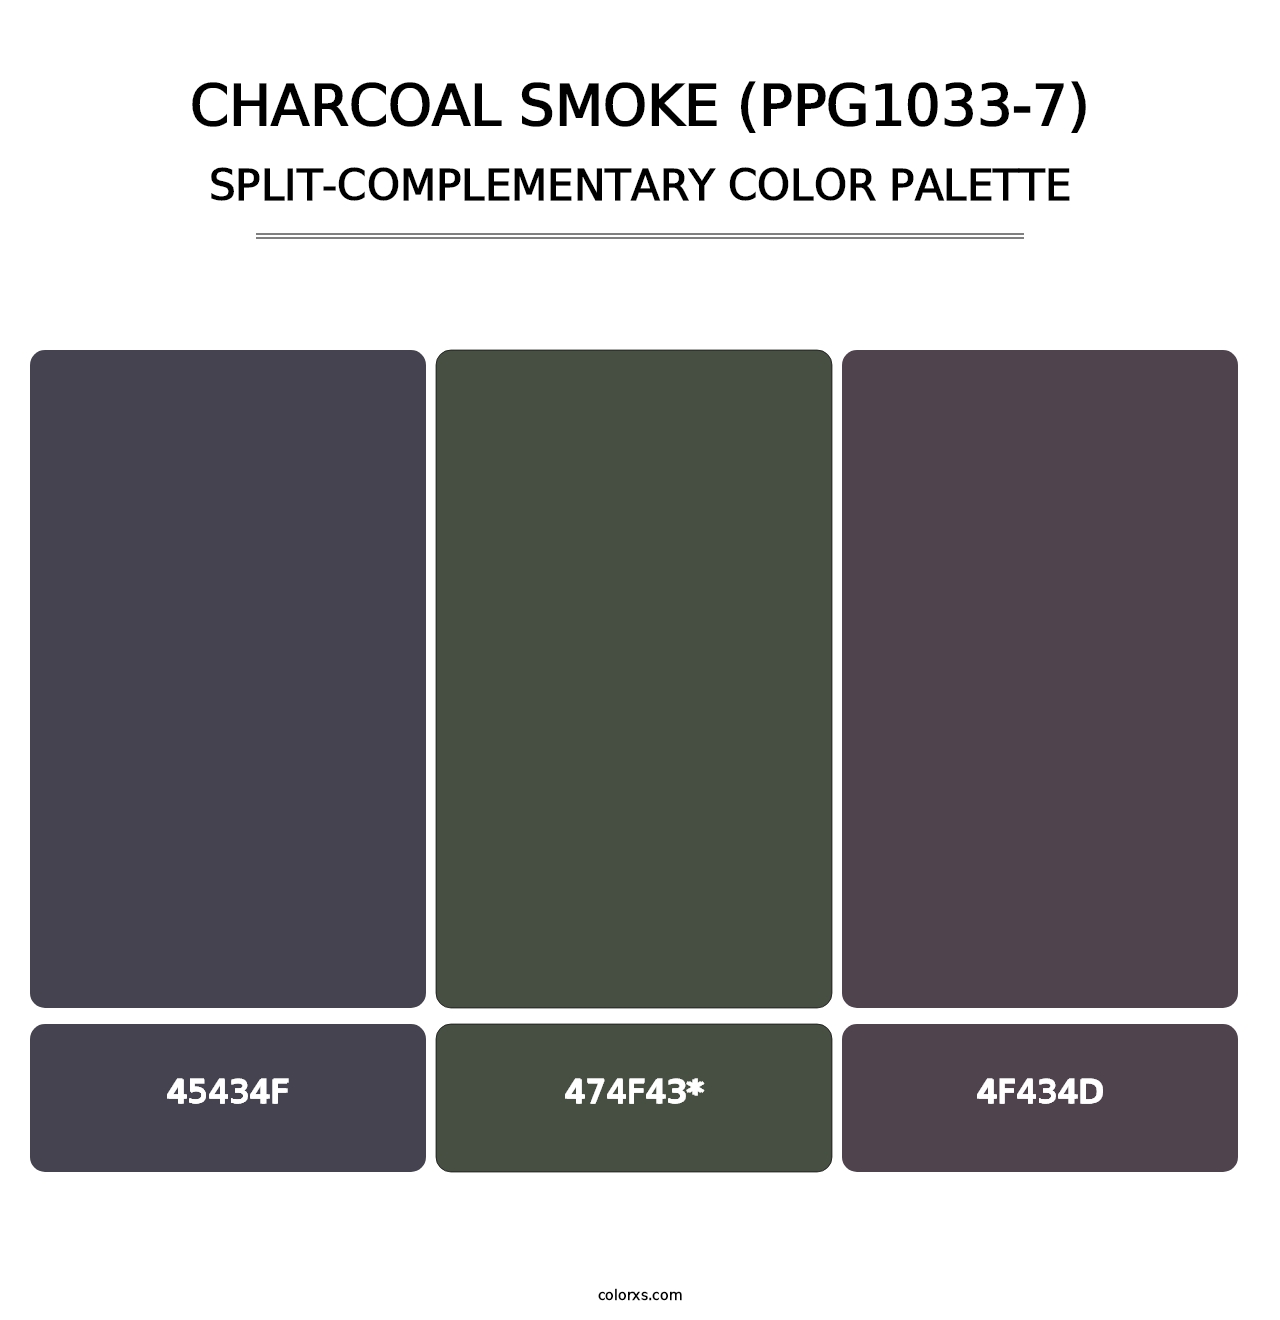 Charcoal Smoke (PPG1033-7) - Split-Complementary Color Palette